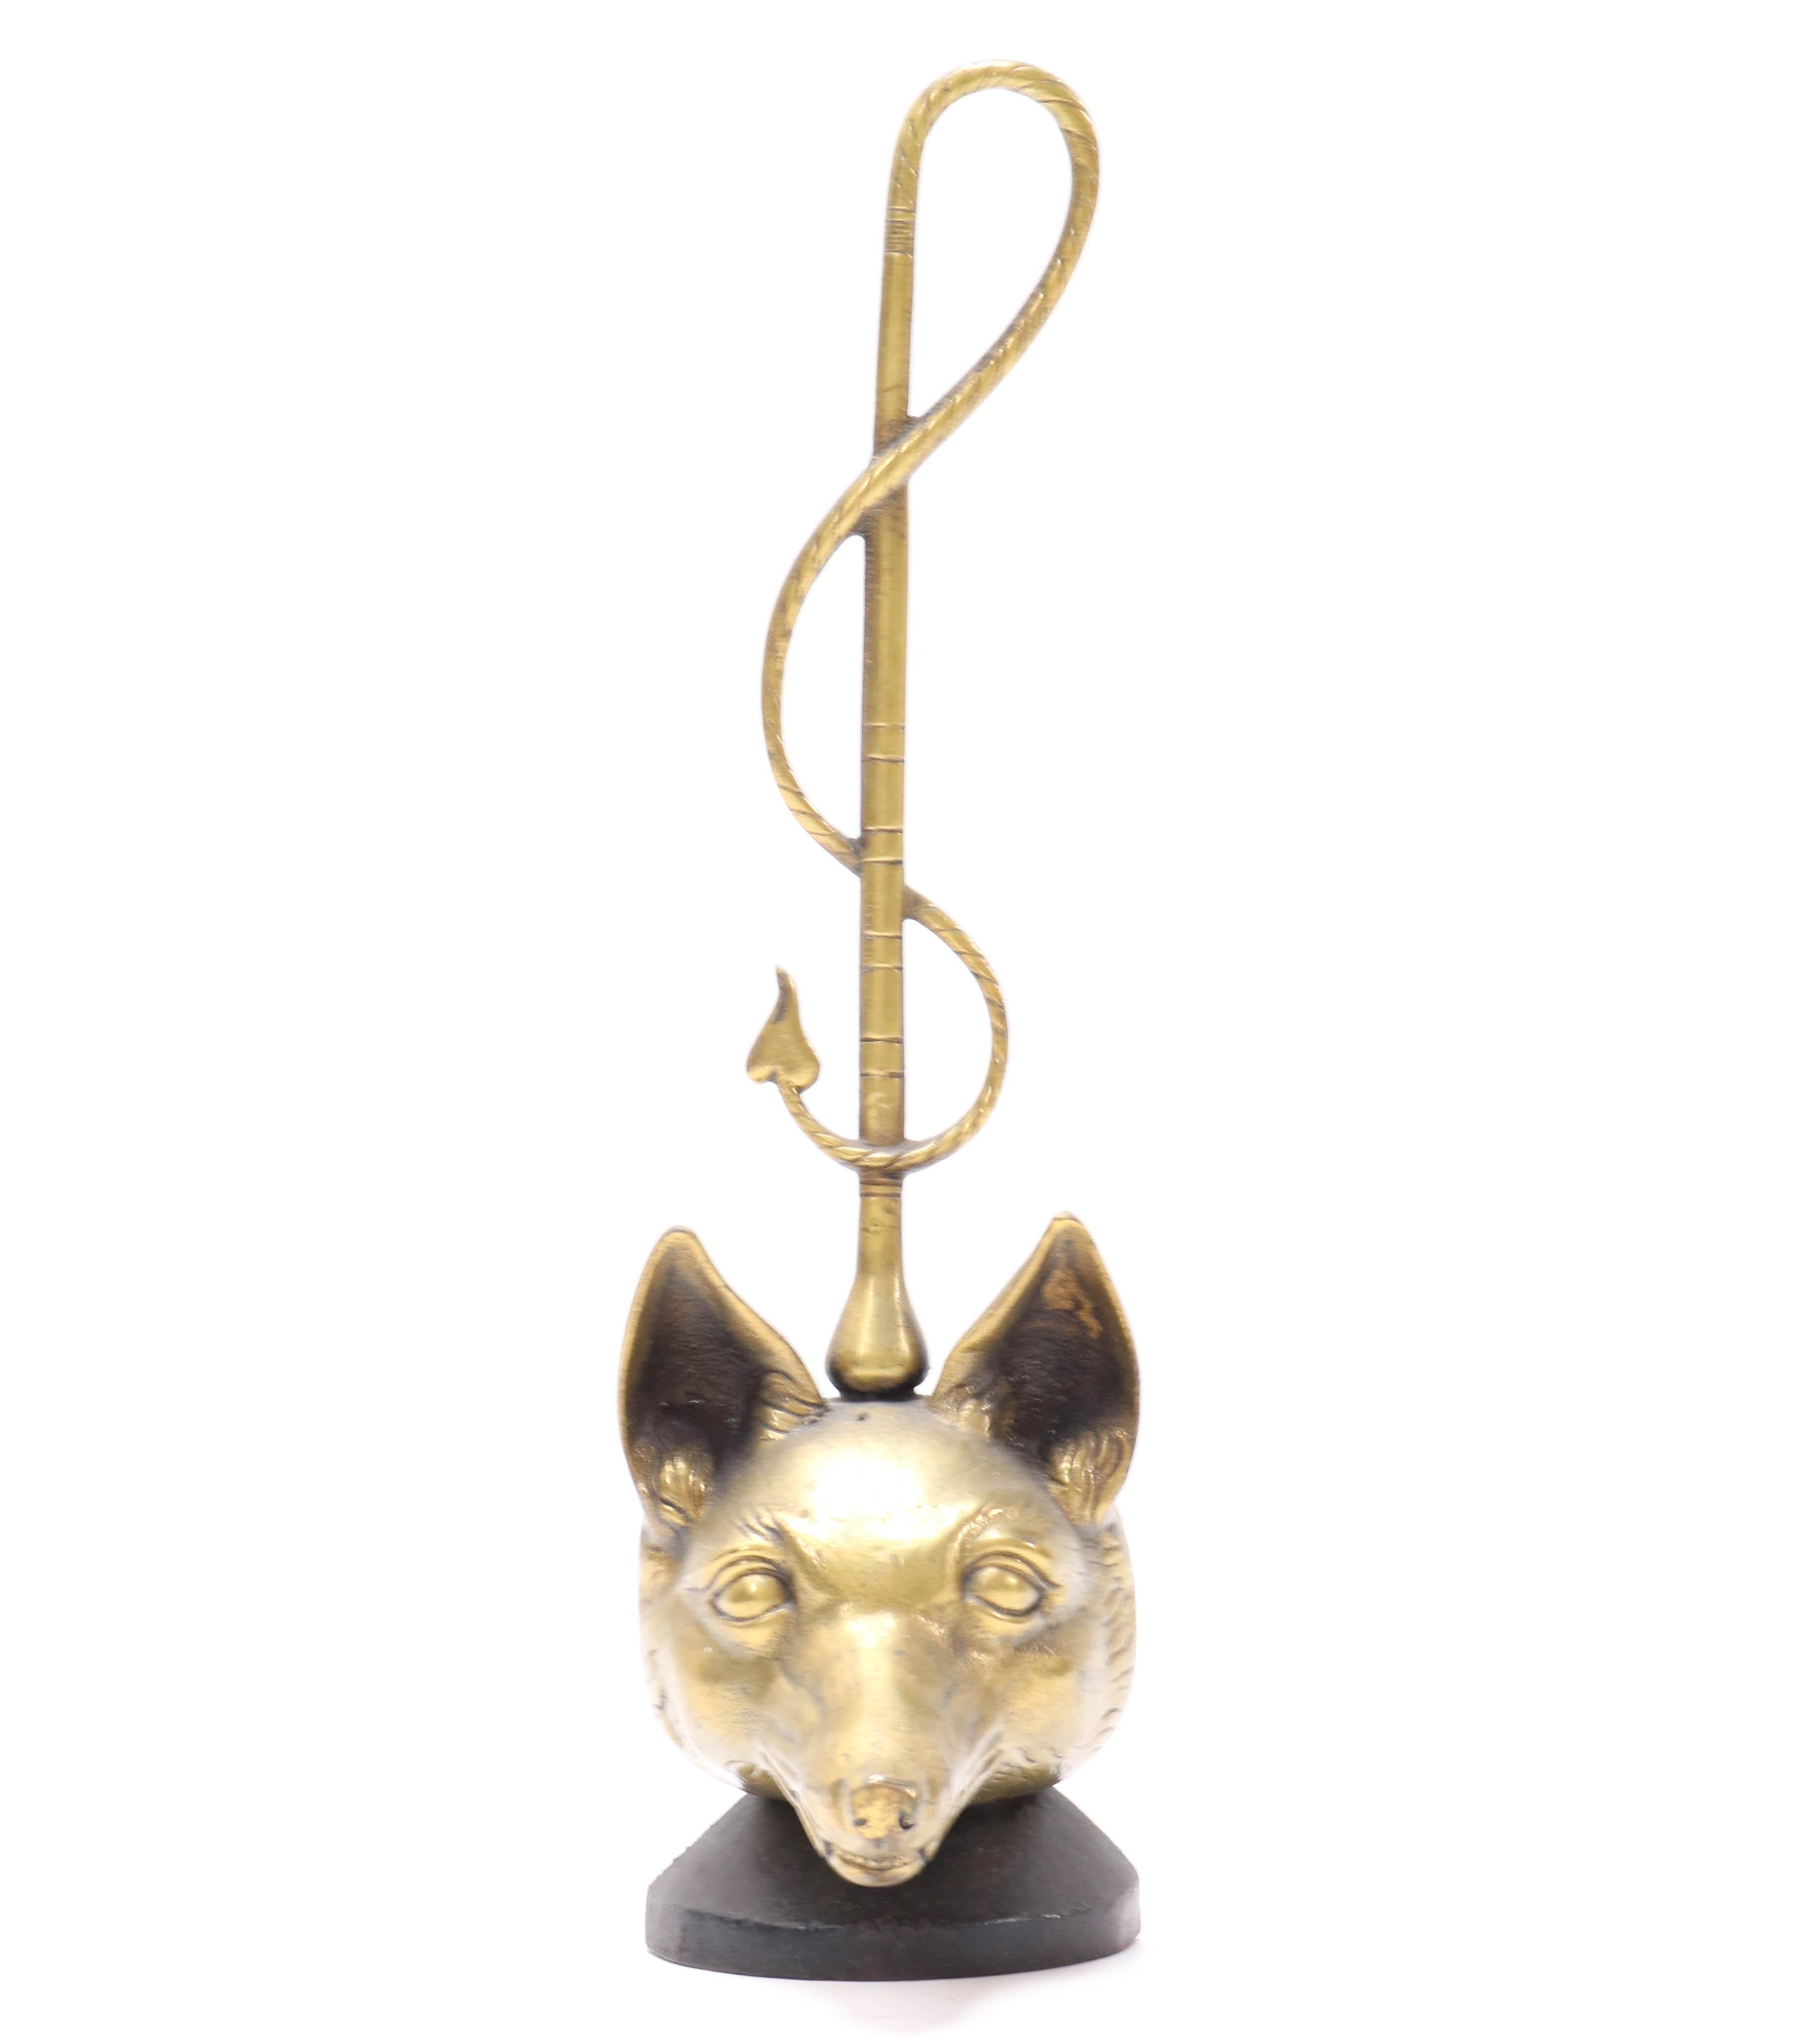 Stunning Art Deco Fox-Head door stop.
Design by Peerage.
Striking English design from the 1920s.
Solid brass and solid iron.
With impressed makers stamp.
In very good condition with a beautiful patina.

 